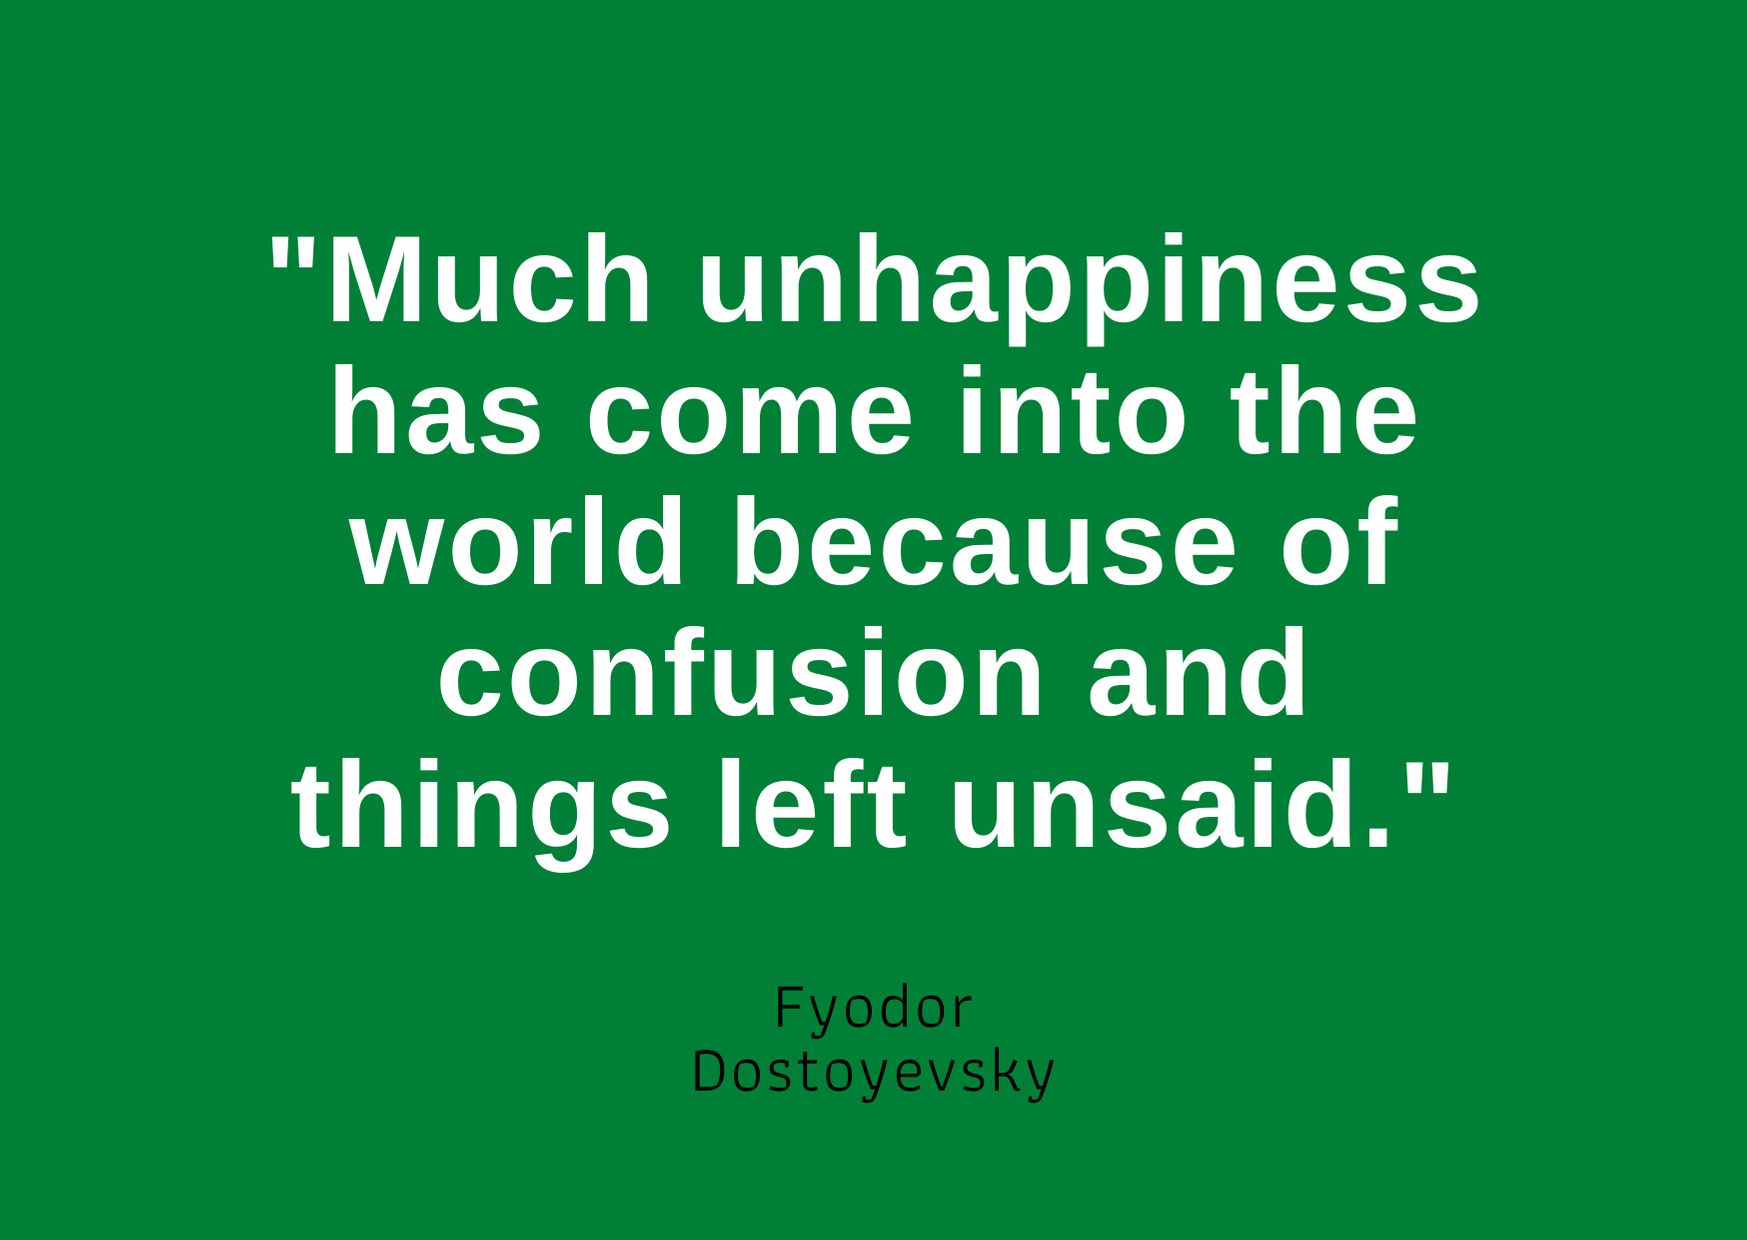 La imagen muestra una frase del escritor Dostoievski: “Much unhappiness has come into the world because of confusion and things left unsaid”